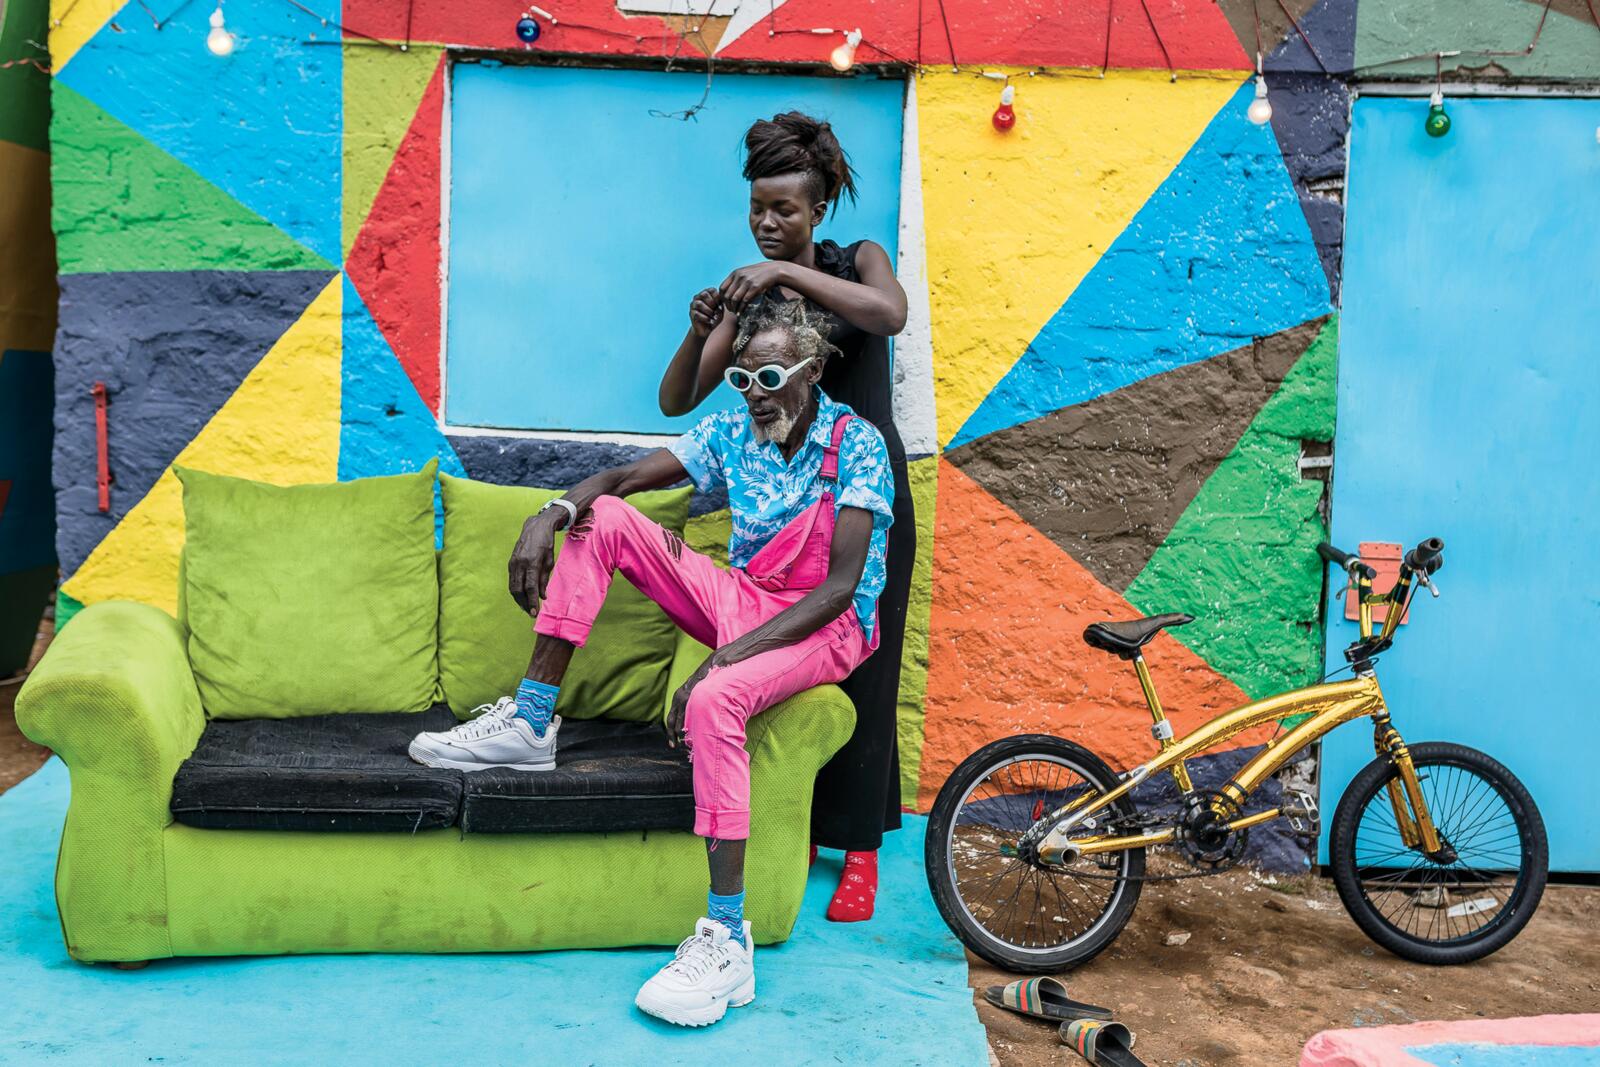 This Nairobi-Area Enclave Is Emerging As A Global Center For Fashion